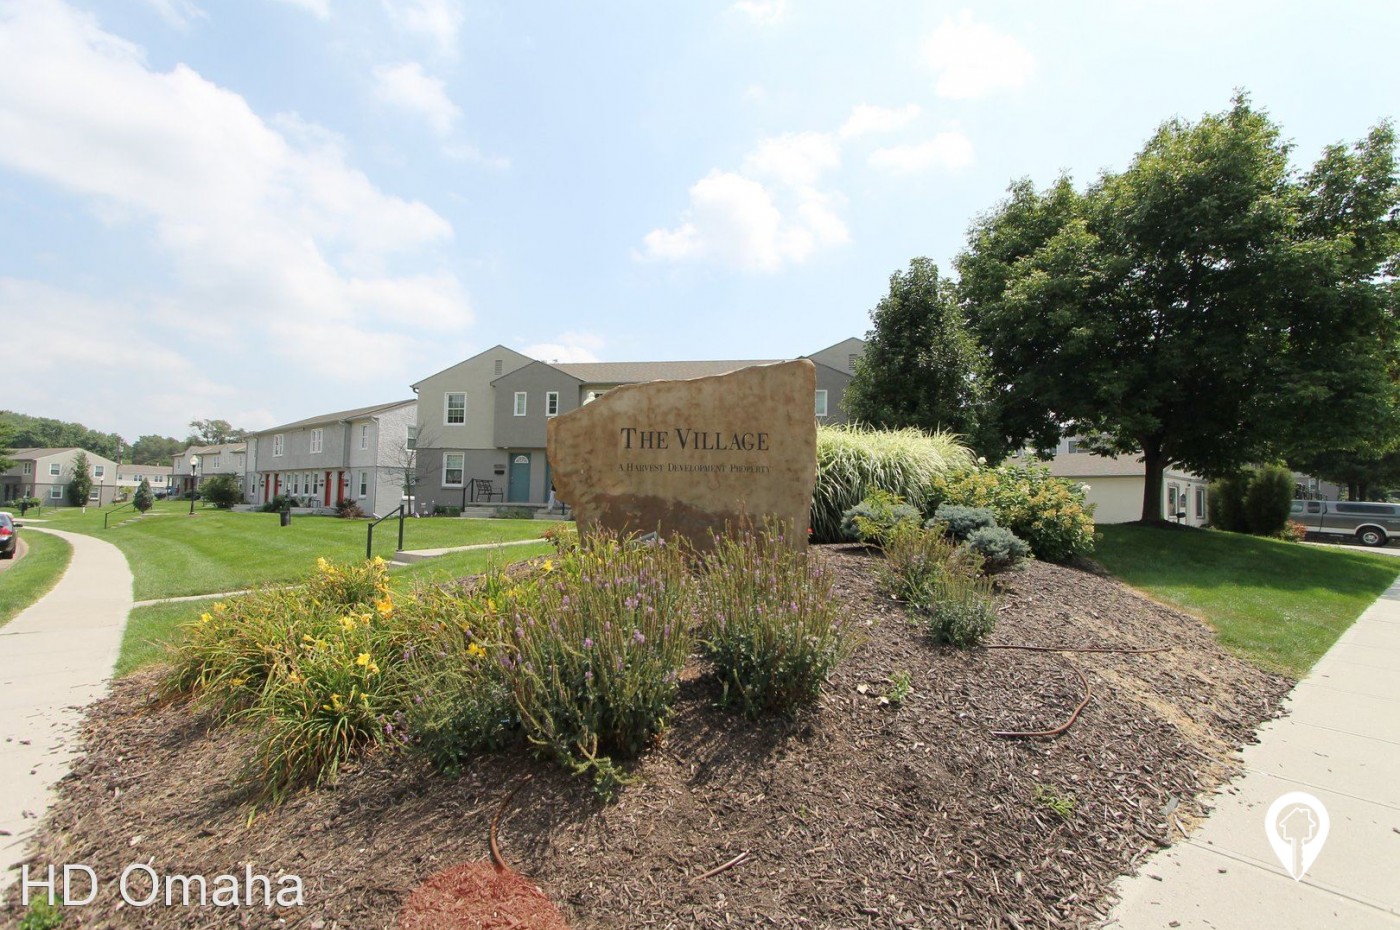 HD Omaha - The Village Townhomes